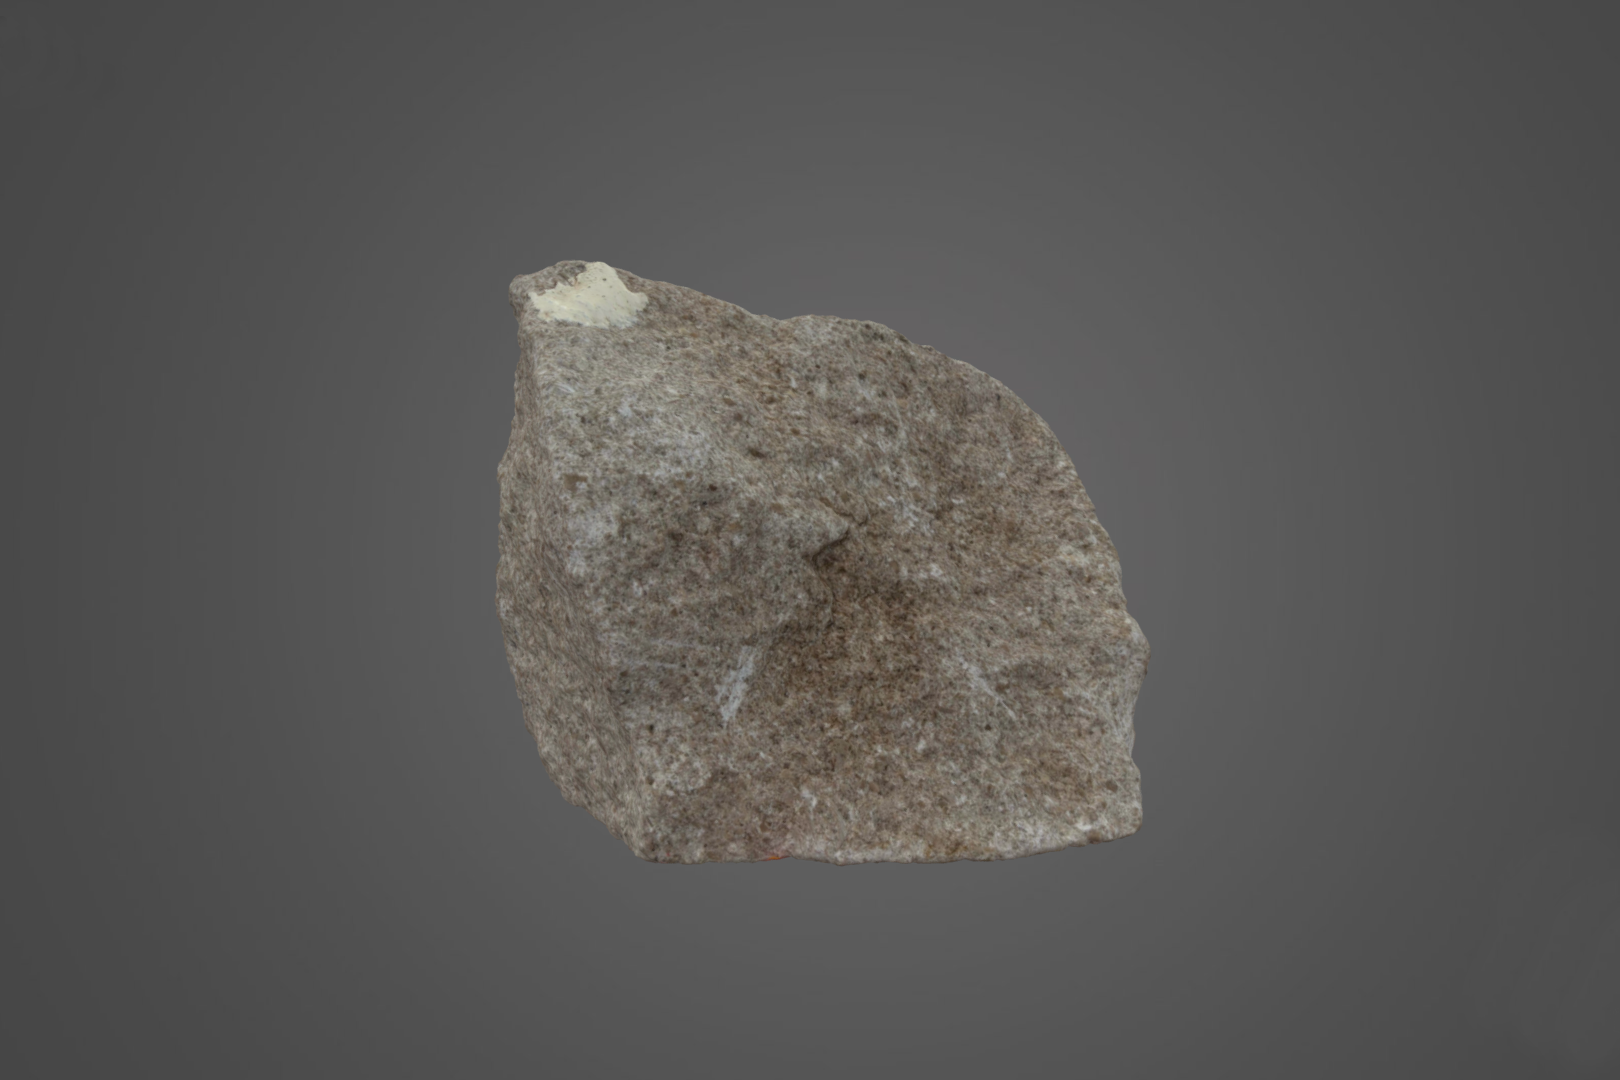 3D Scan of a Limestone Sample